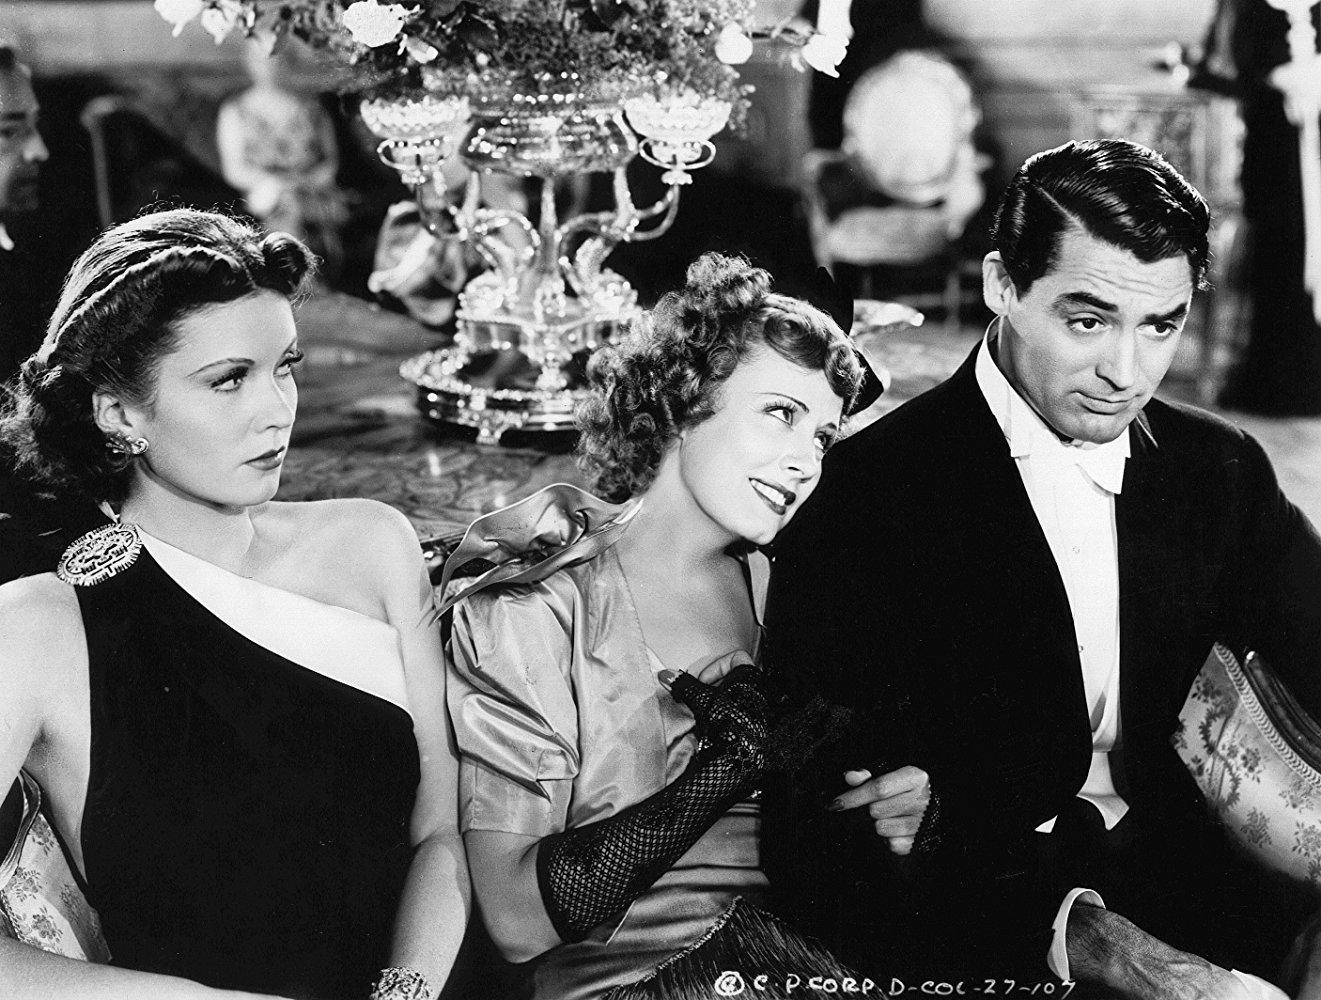  The Awful Truth : Irene Dunne, Cary Grant, Ralph Bellamy,  Alexander D'Arcy, Cecil Cunningham, Molly Lamont, Esther Dale, Joyce  Compton, Robert Allen, Robert Warwick, Mary Forbes, Claud Allister, Joseph  Walker, Leo